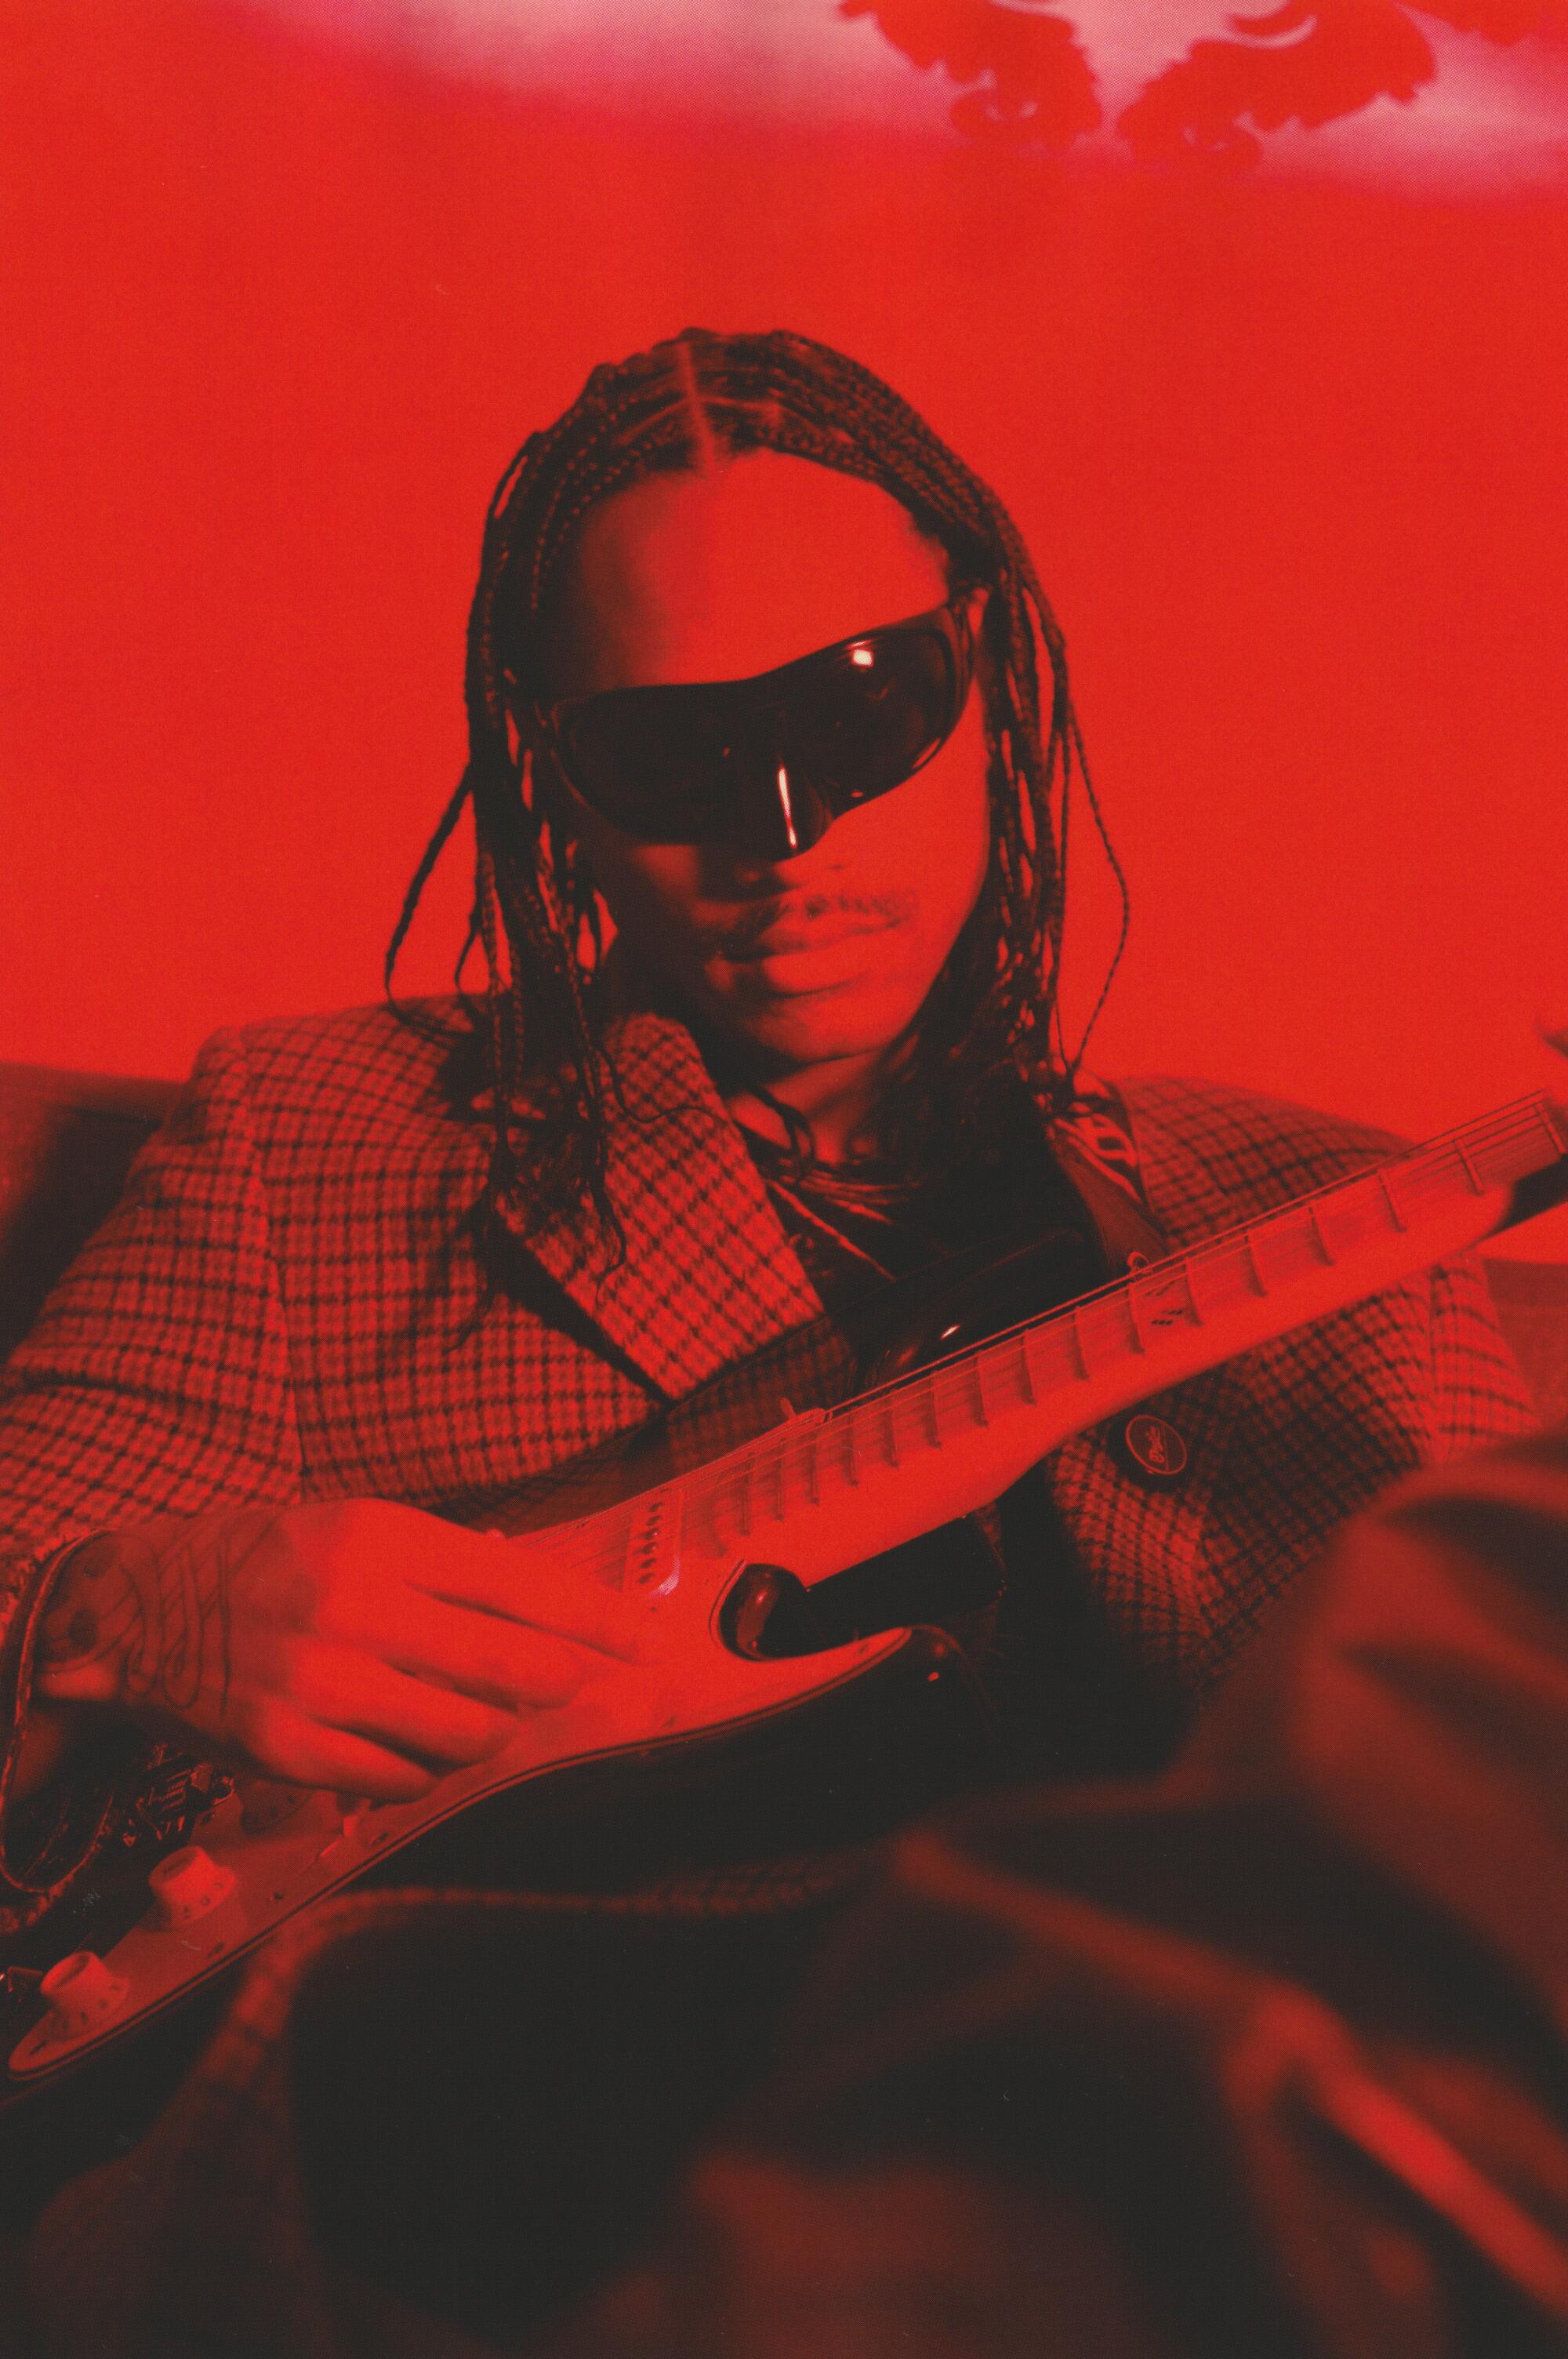 A man in sunglasses, seated, cradles an electric guitar